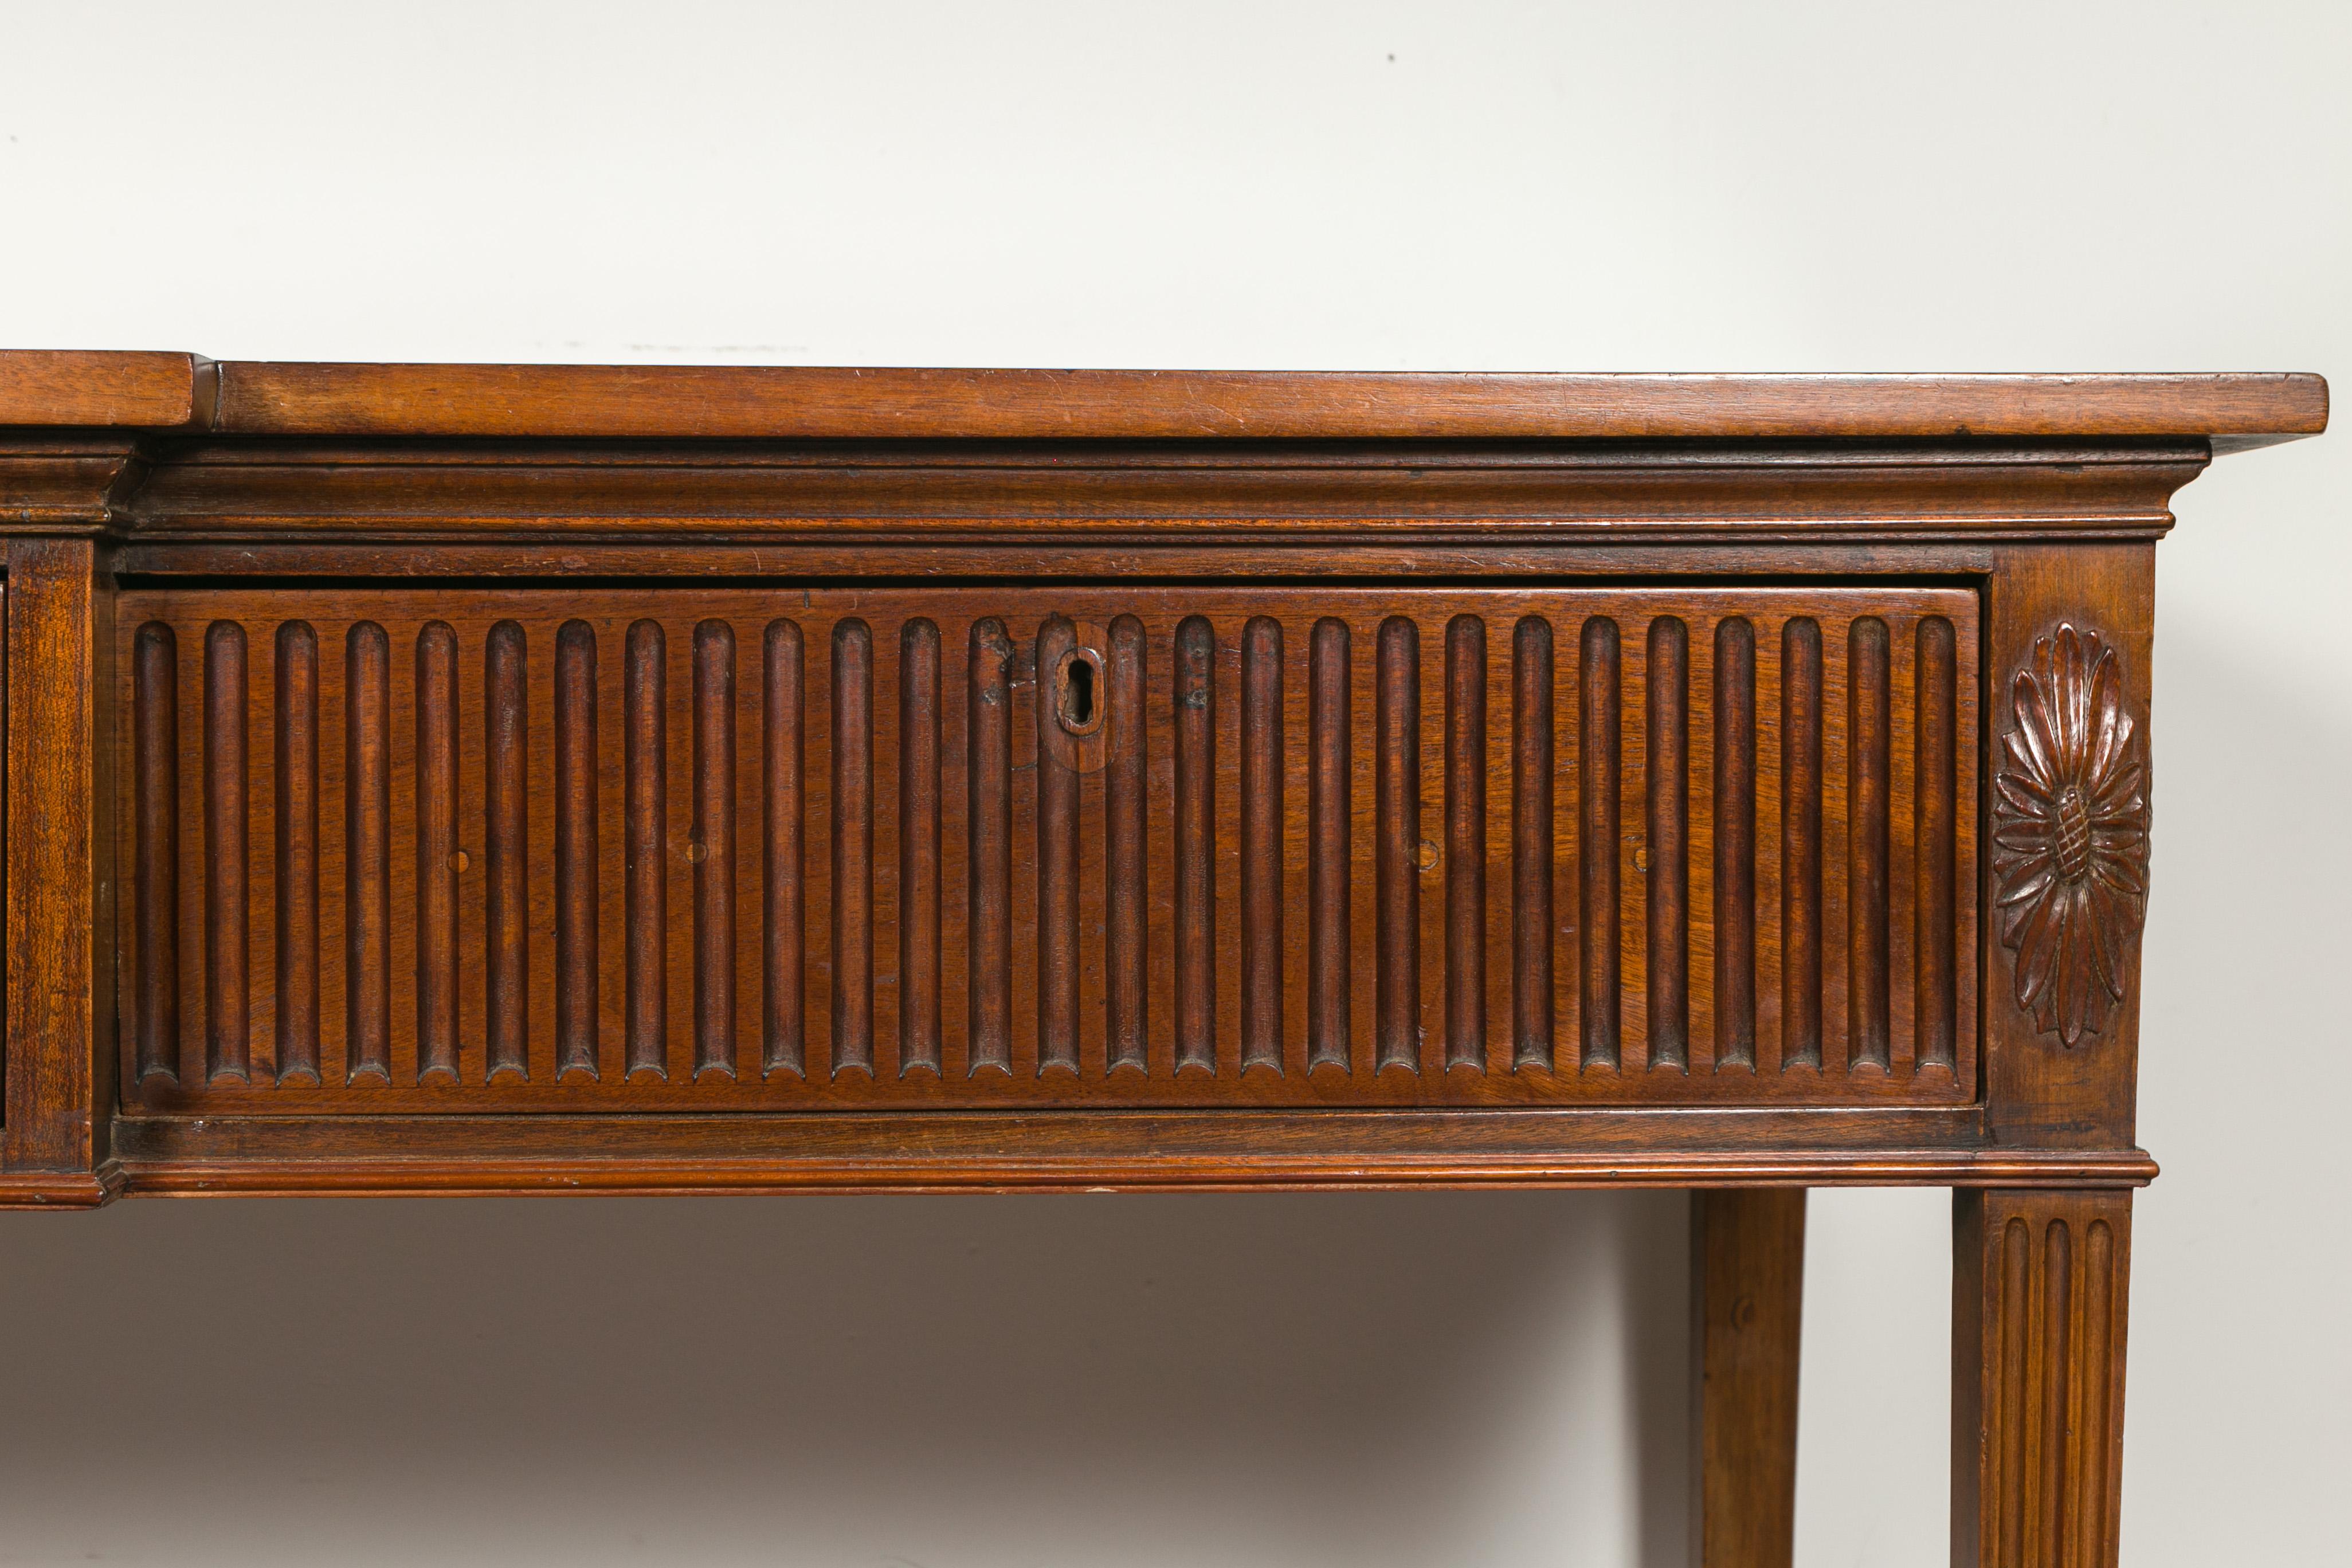 English Georgian Period 1820s Mahogany Sideboard with Fluted Motifs and Drawers 1